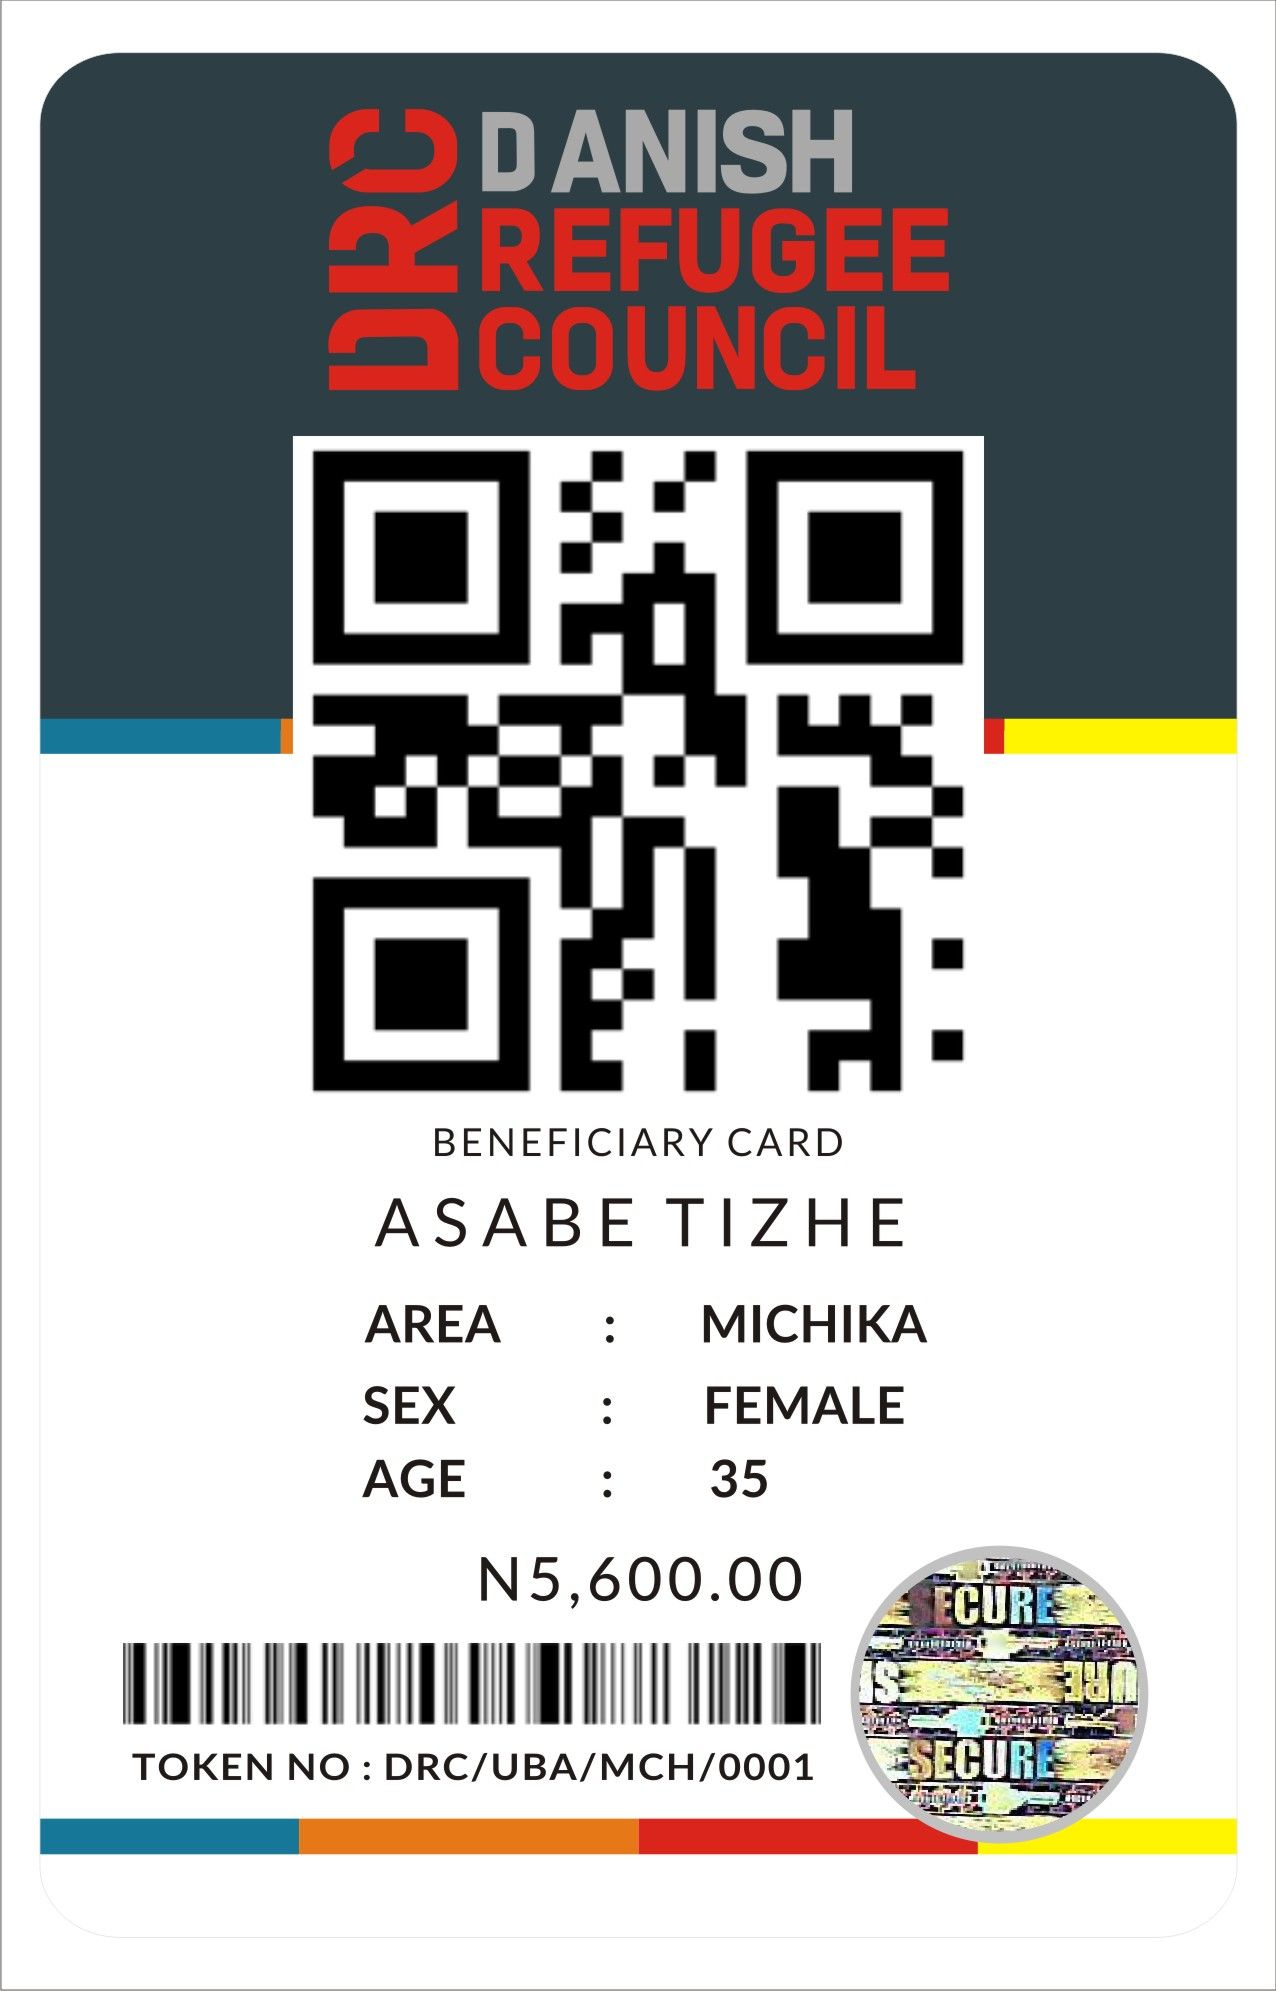 CONTACT CHINEDU ON 09022536974 TO PRINT AUTHENTICATION LABELS AND SECURITY PRINTS